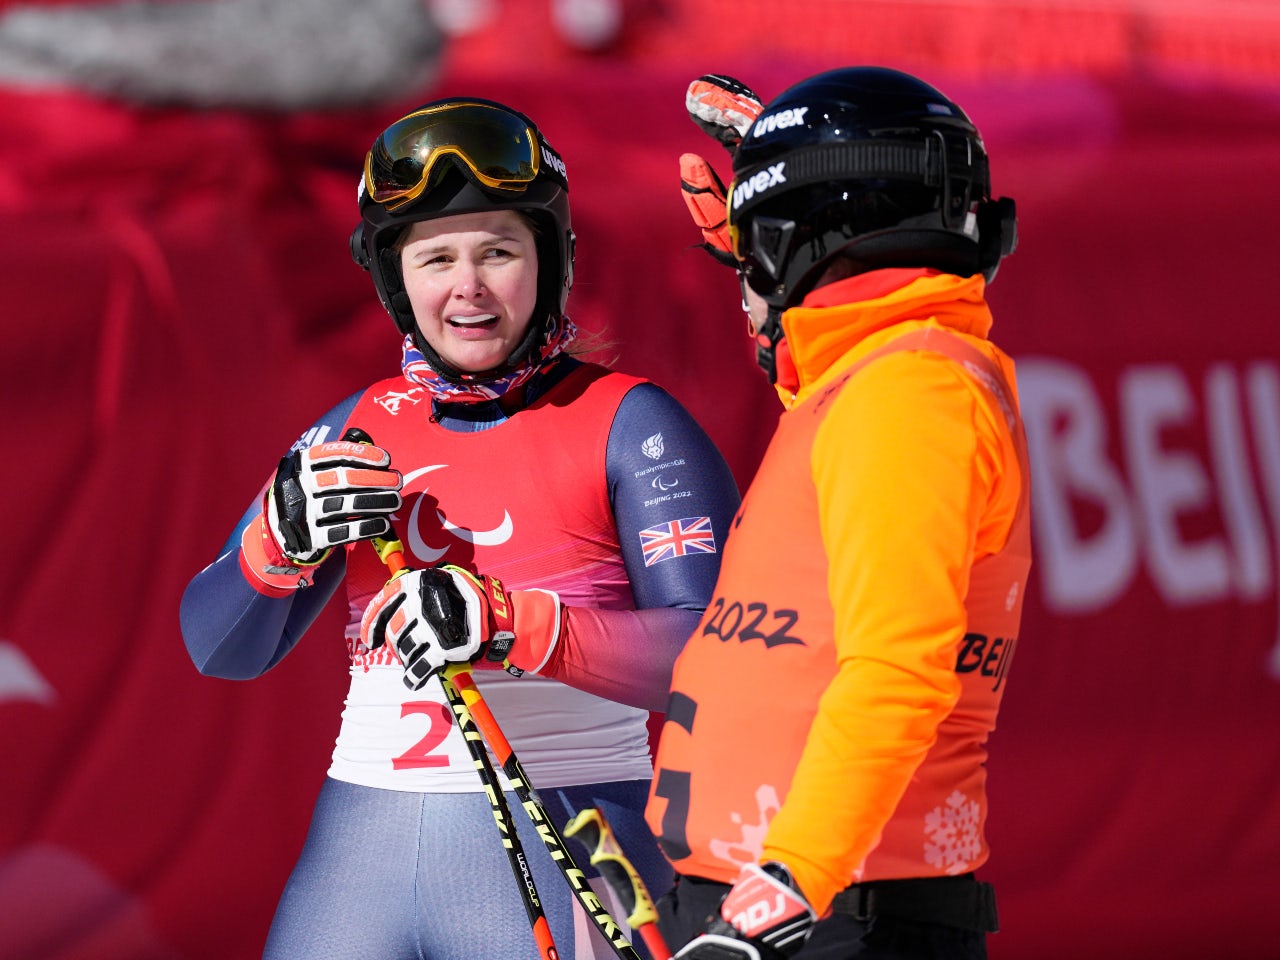 Great Britain's Millie Knight takes Paralympic bronze in downhill skiing